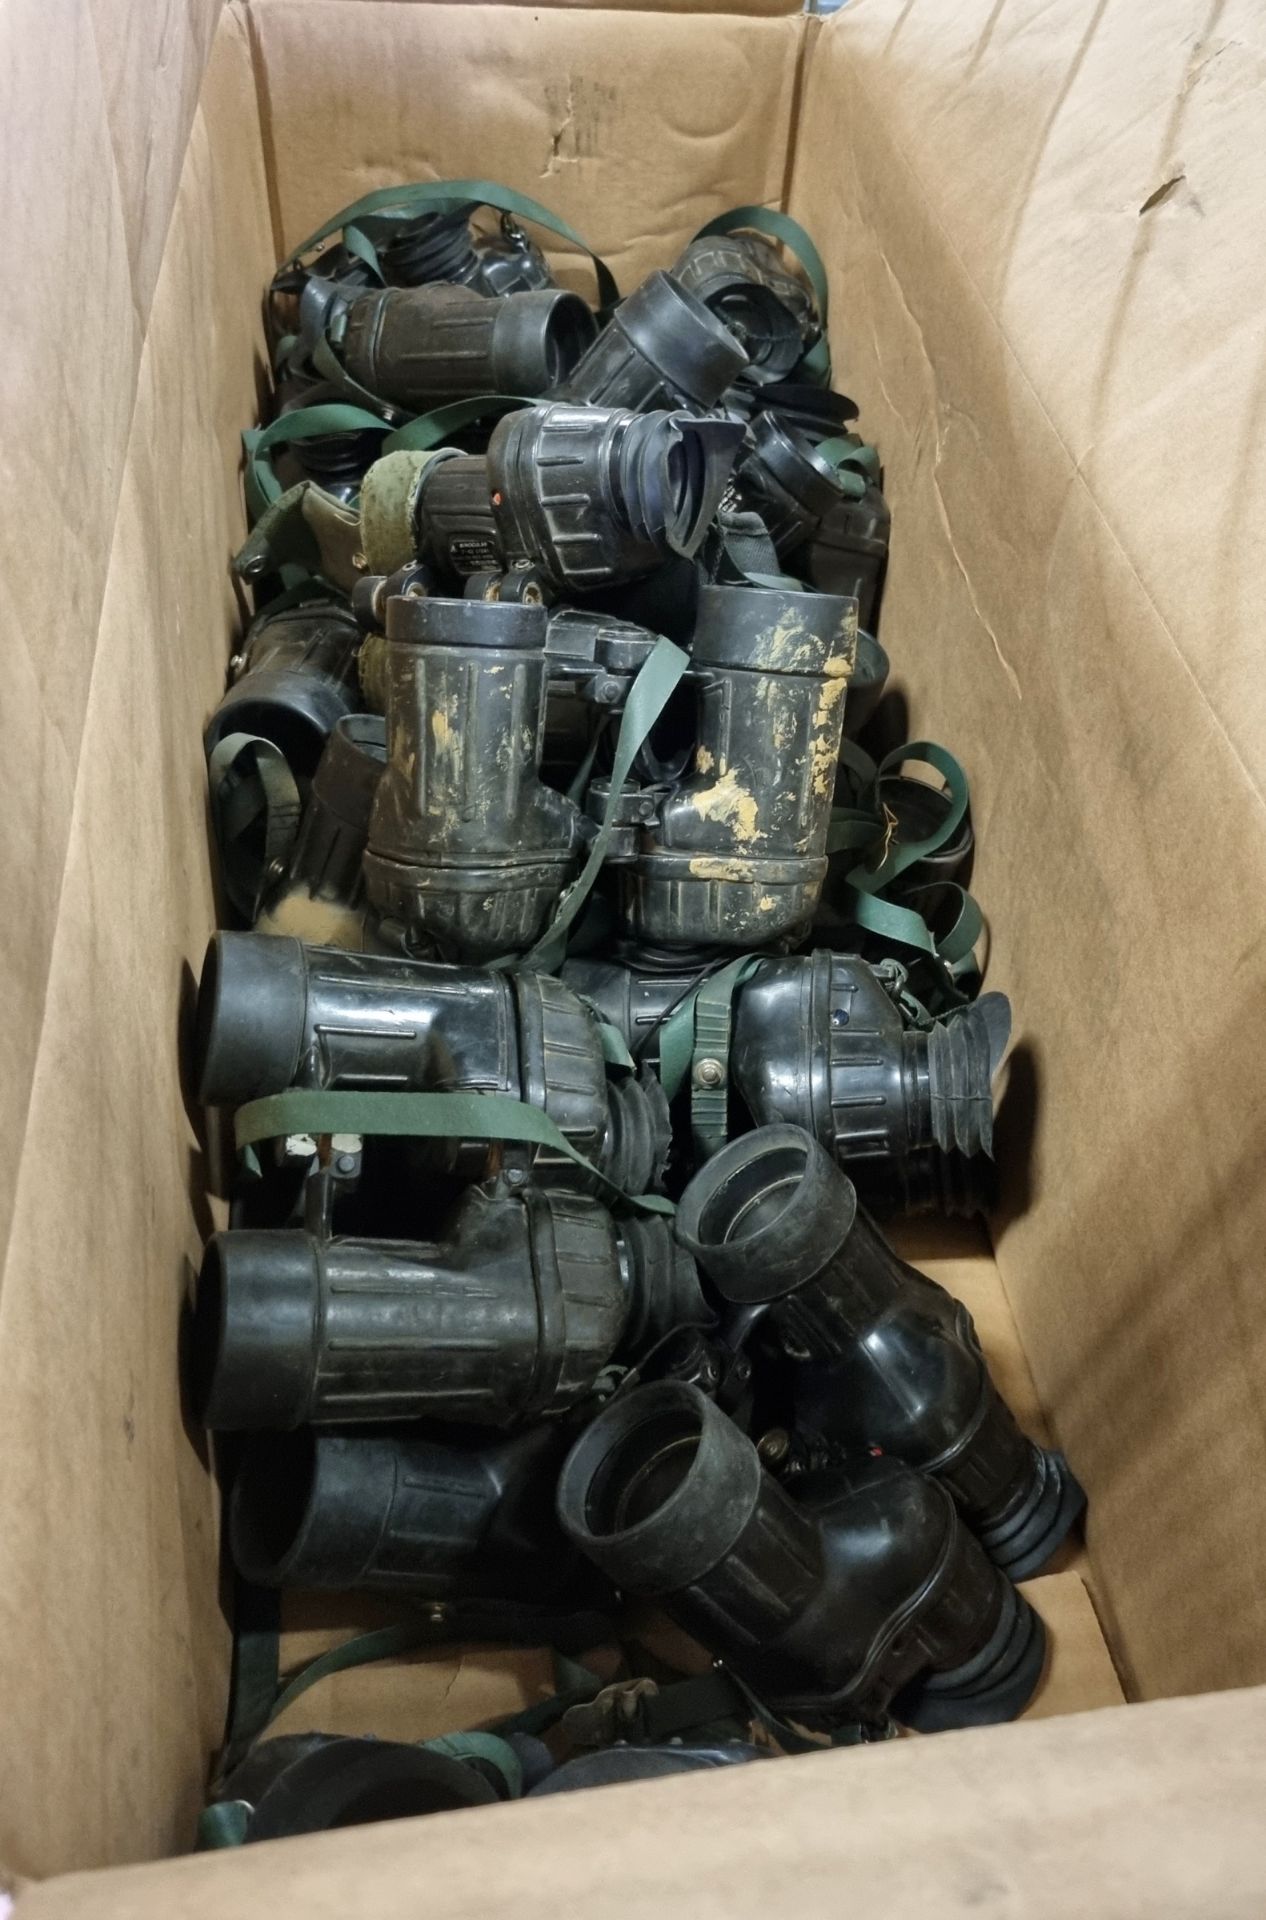 Electrical supplies, binoculars, light bulbs - see description for details - Image 6 of 8